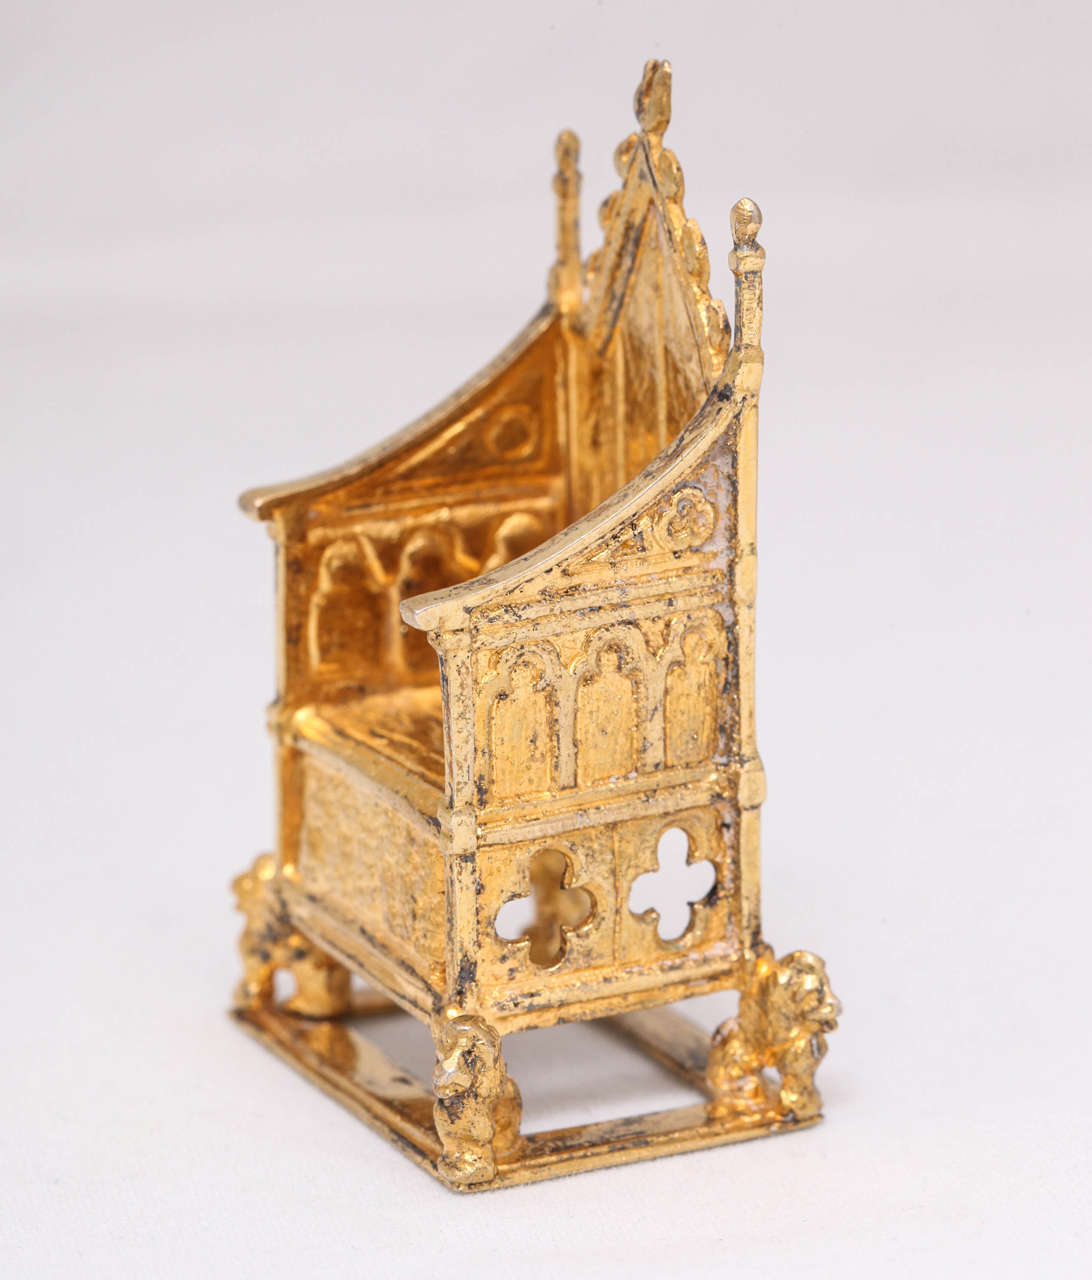 Edwardian, sterling silver-gilt, miniature coronation throne/chair, made for the coronation of King Edward VII. It is a replica of the one in Westminster Abbey. Made in Chester, England, 1901 by Cornelius Desormeu Saunders and James Francis Hollings